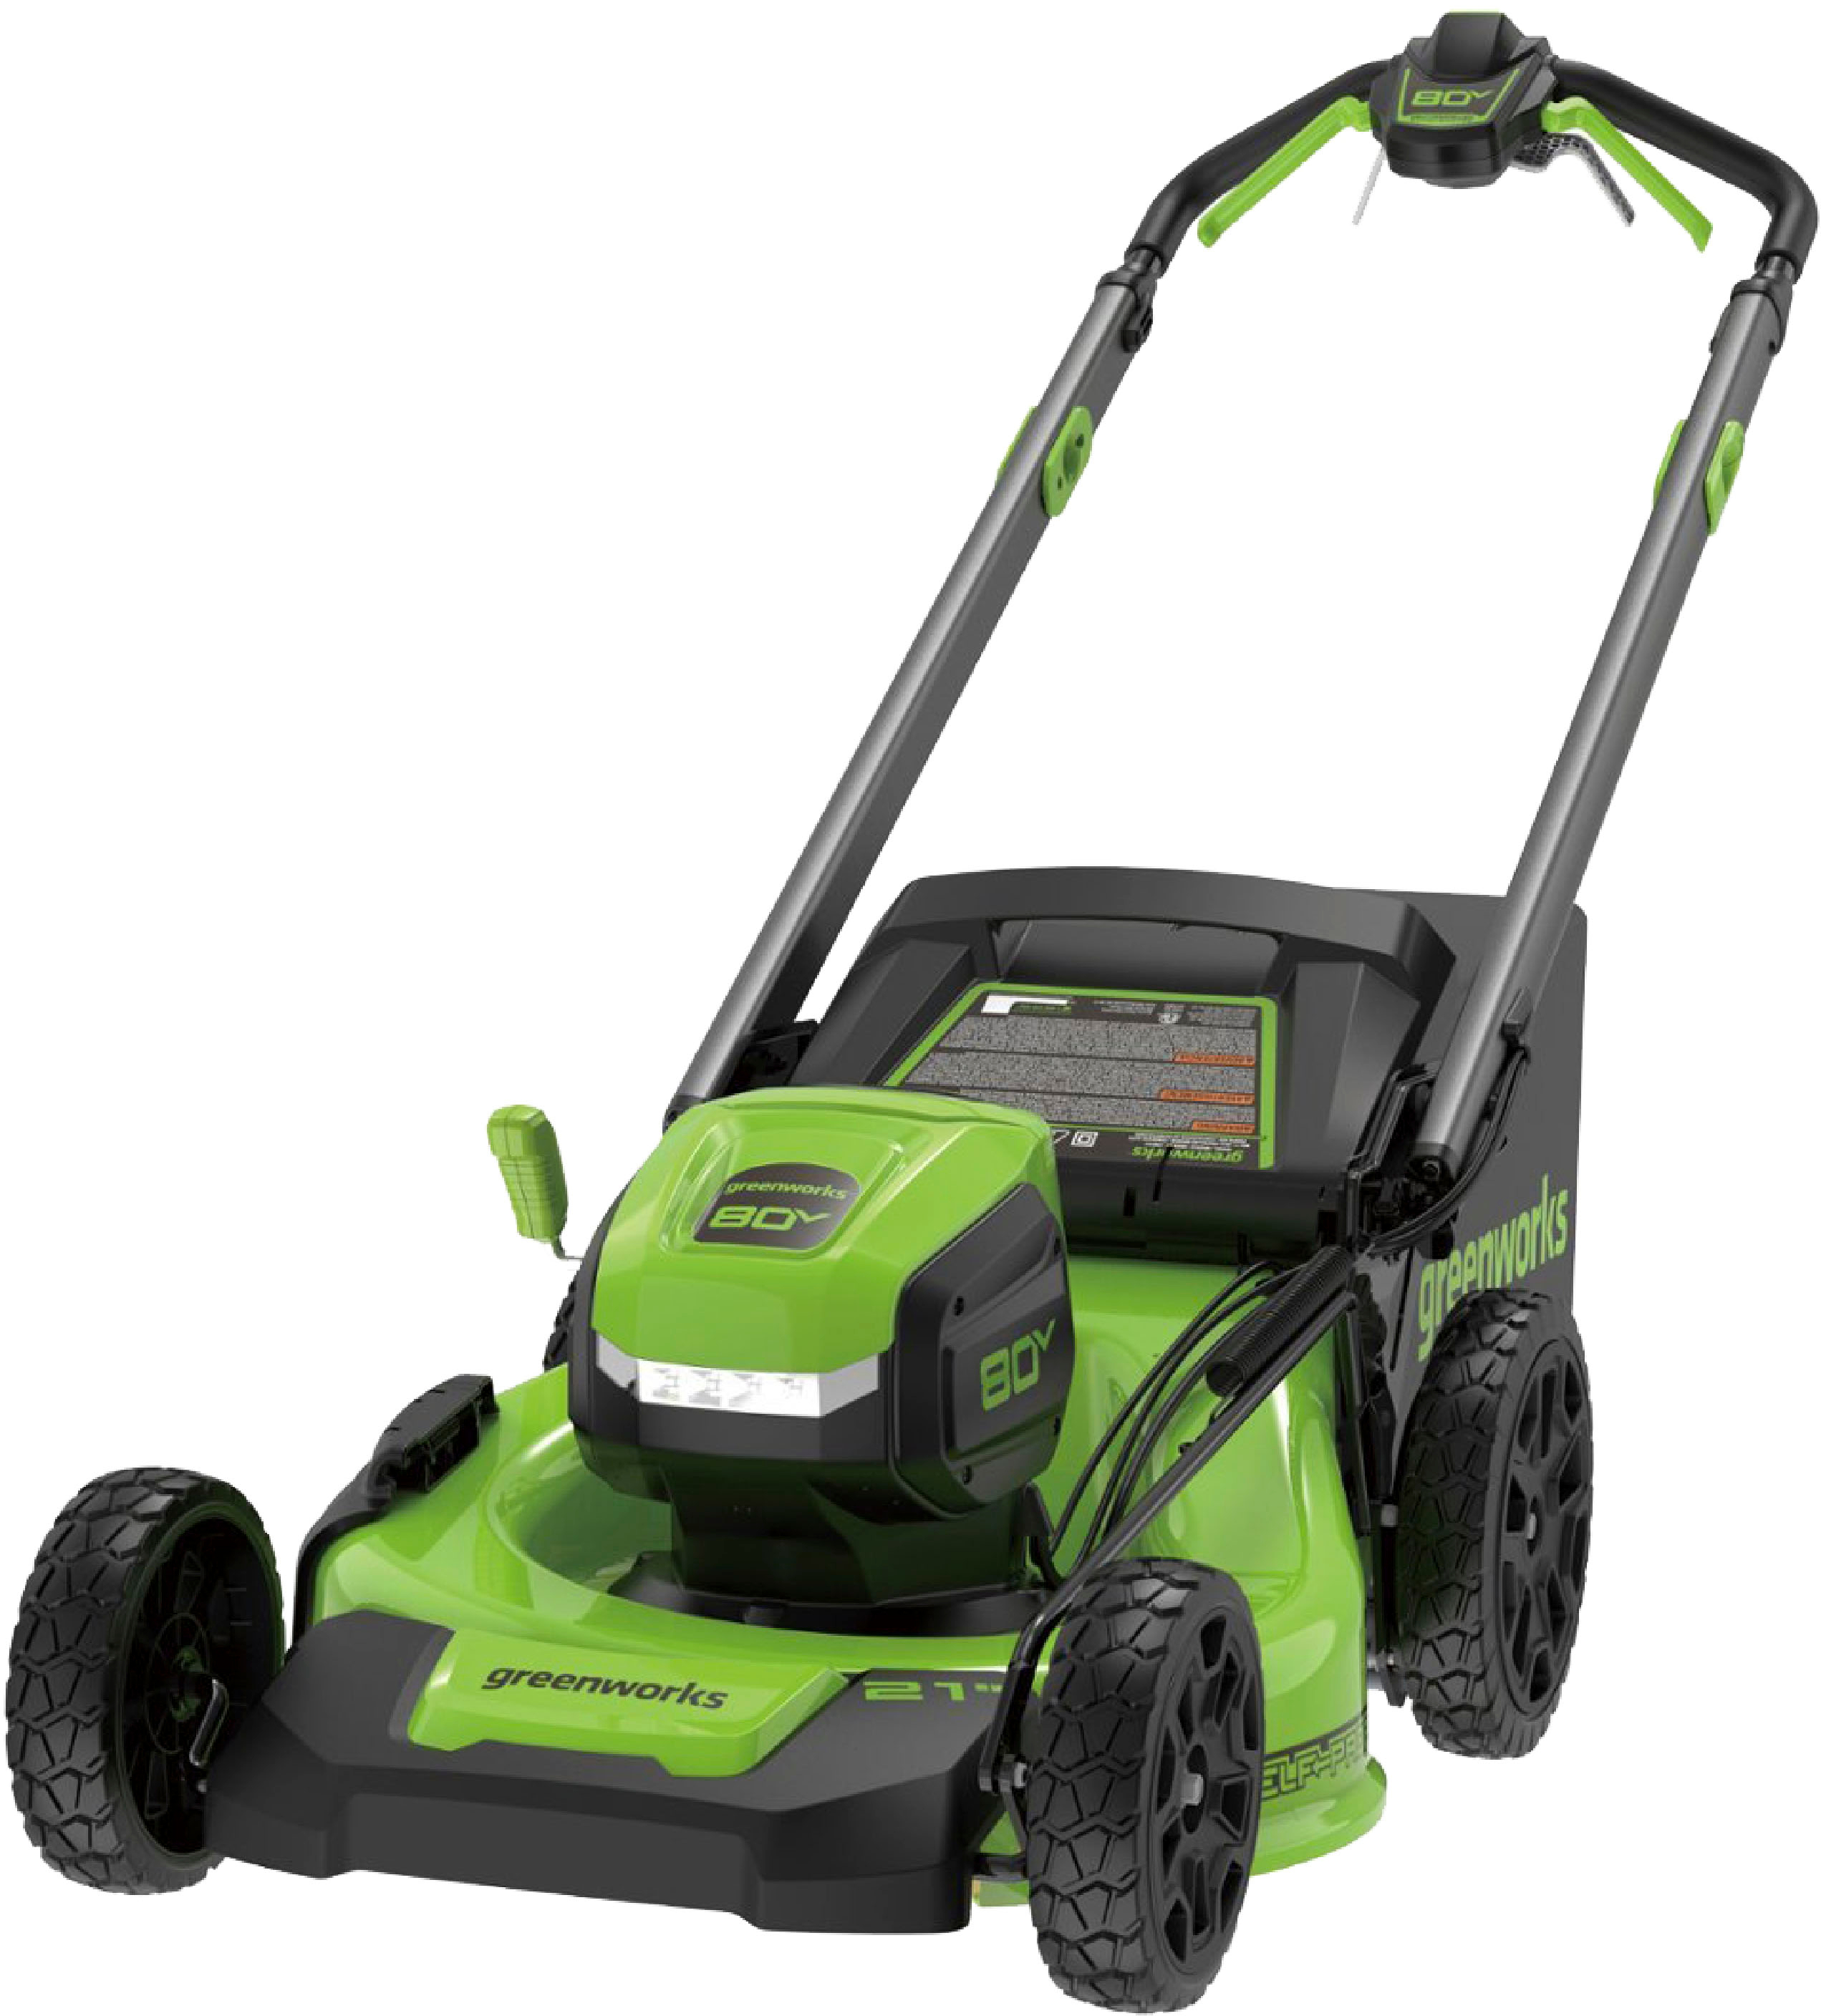 Angle View: Greenworks - 80 Volt 21-Inch Self-Propelled Lawn Mower (1 x 4.0Ah Battery and 1 x Charger) - Green